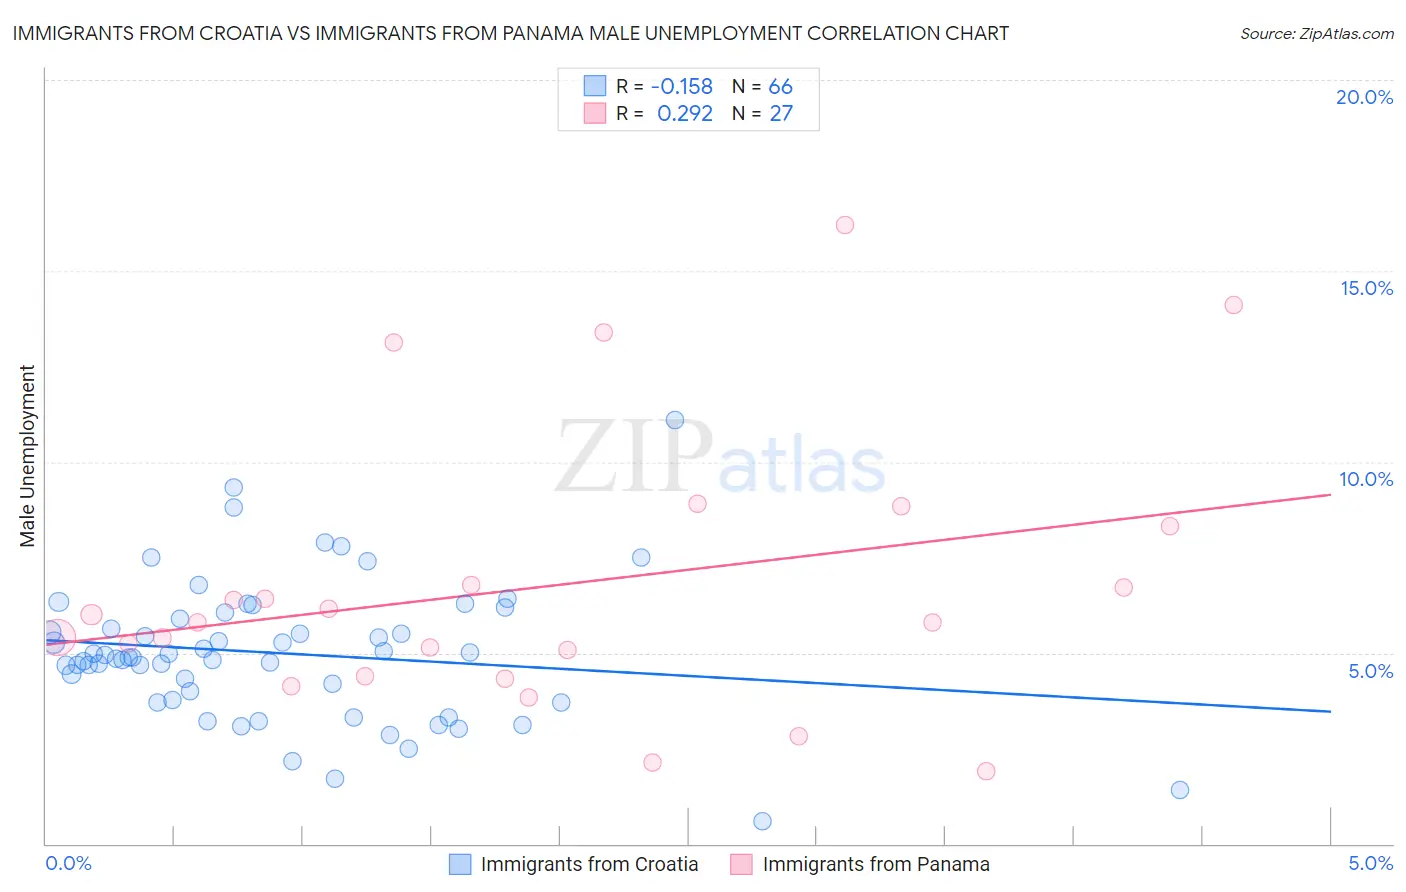 Immigrants from Croatia vs Immigrants from Panama Male Unemployment